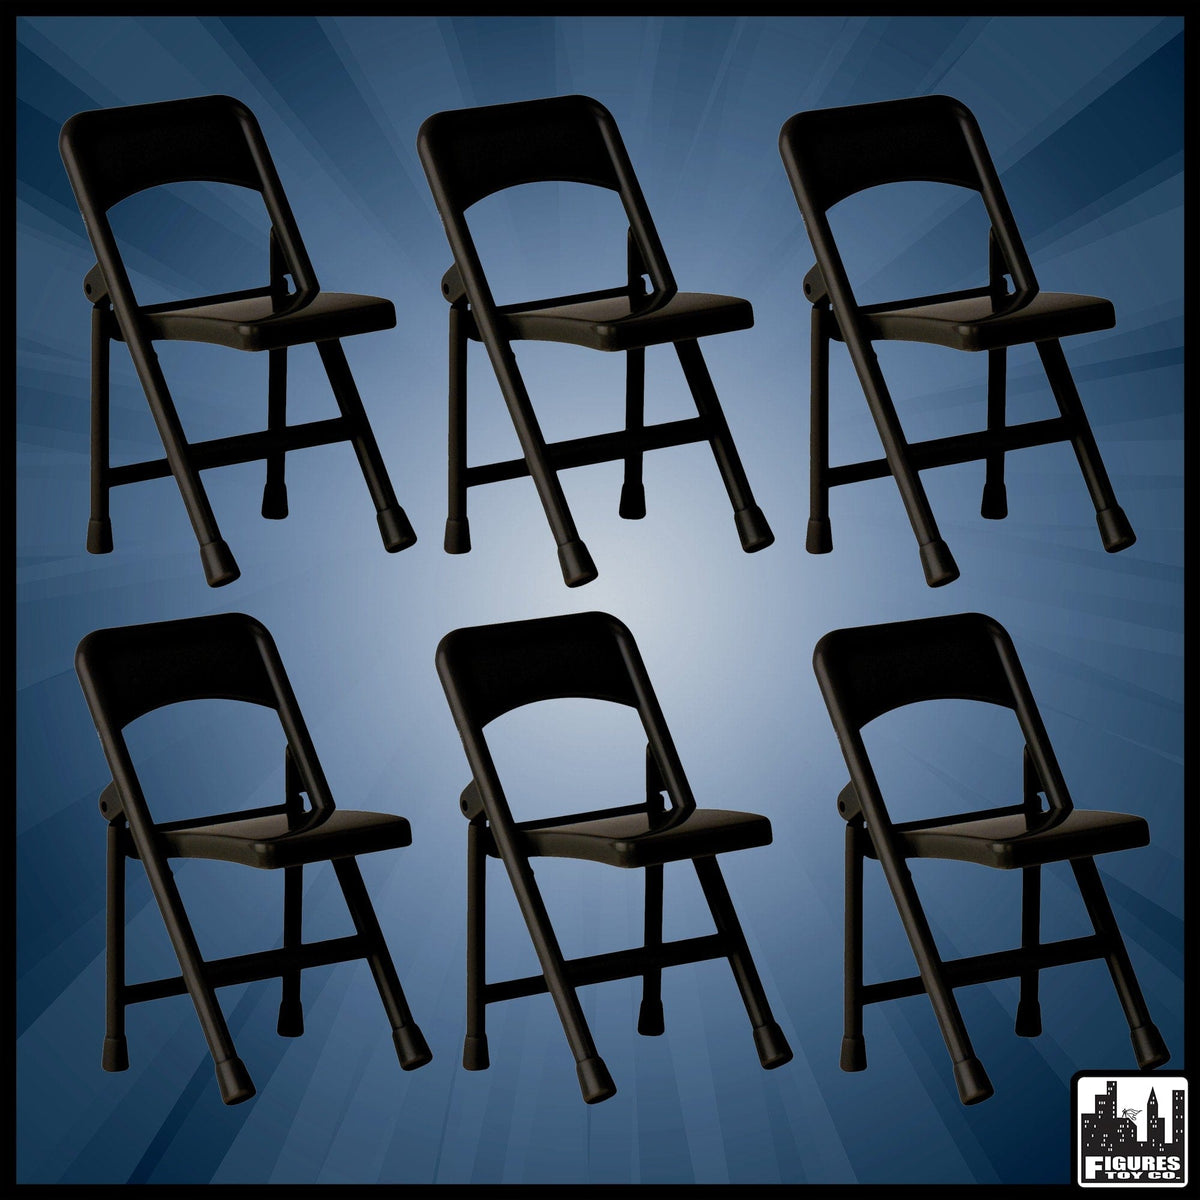 Set of 6 Black Plastic Toy Folding Chairs for WWE Wrestling Action Figures